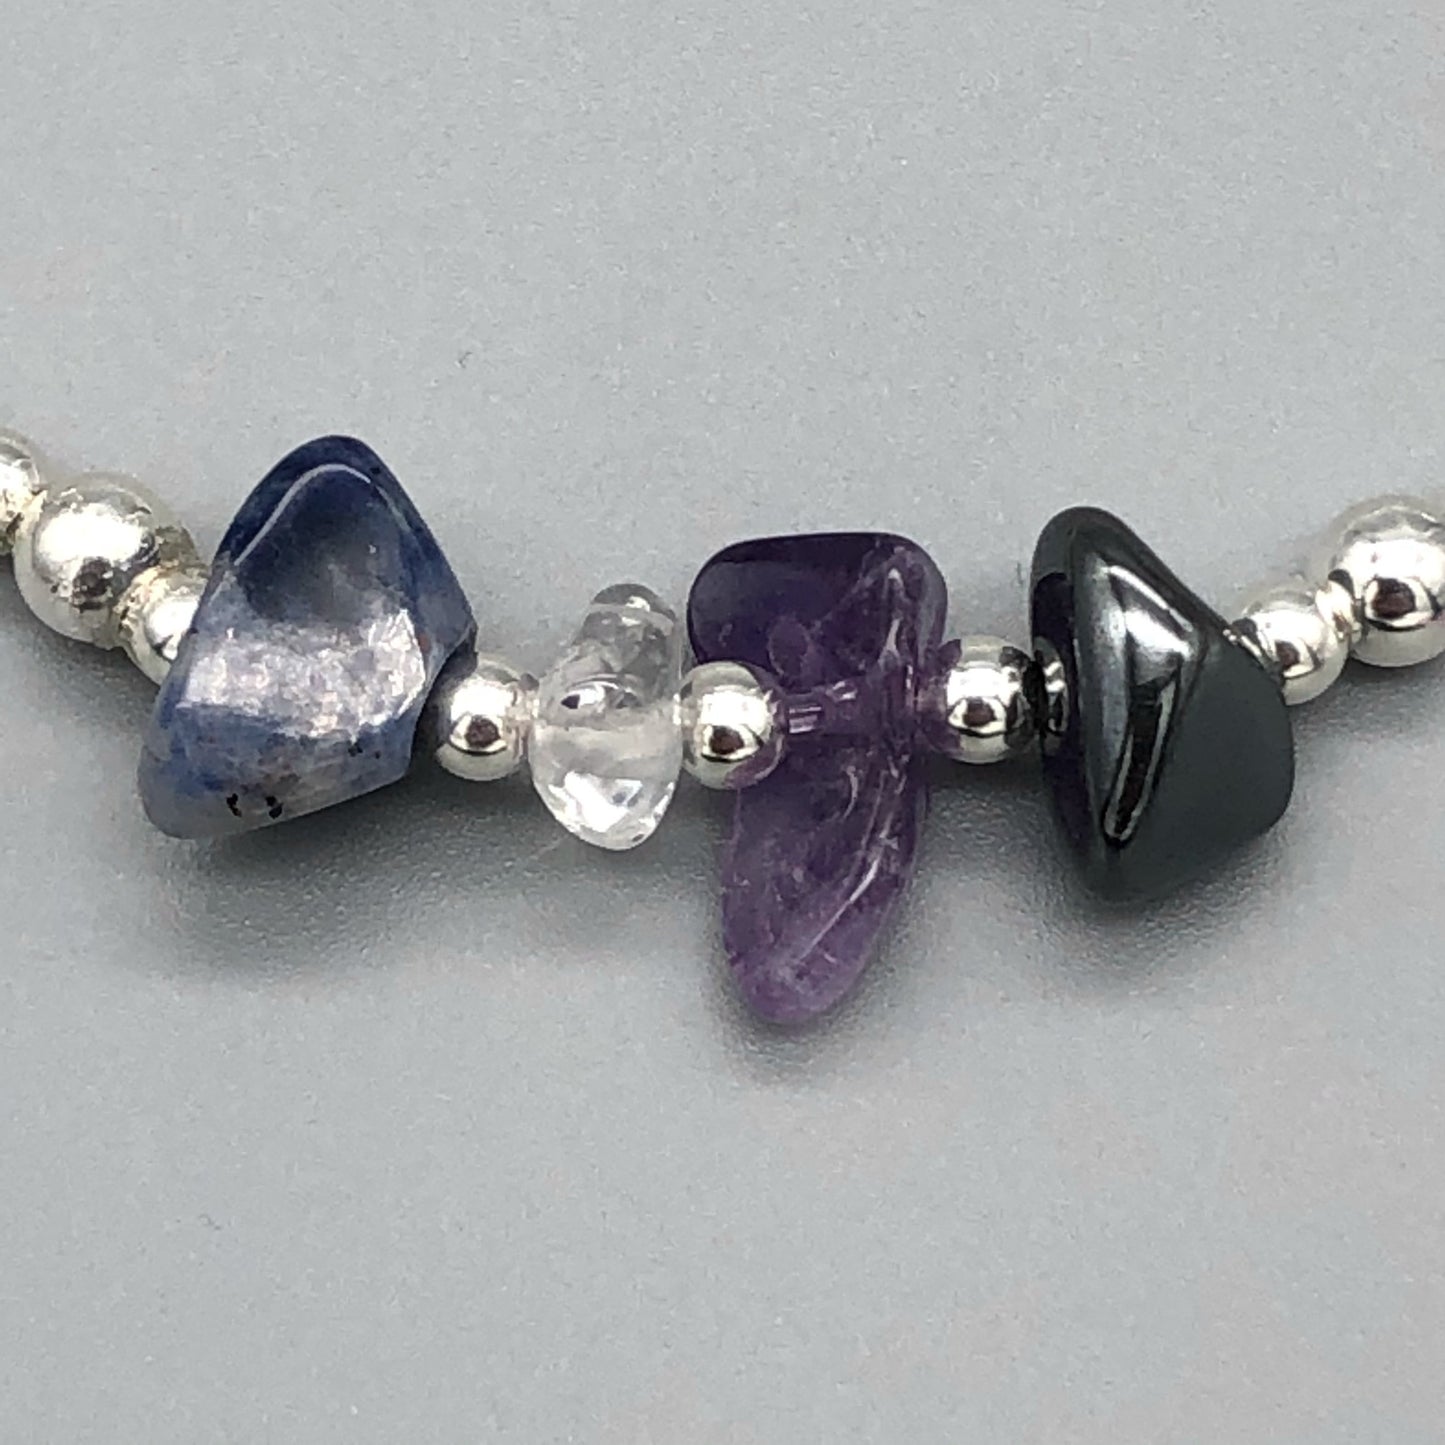 Closeup of Weight loss healing crystal and sterling silver stacking bracelet by My Silver Wish